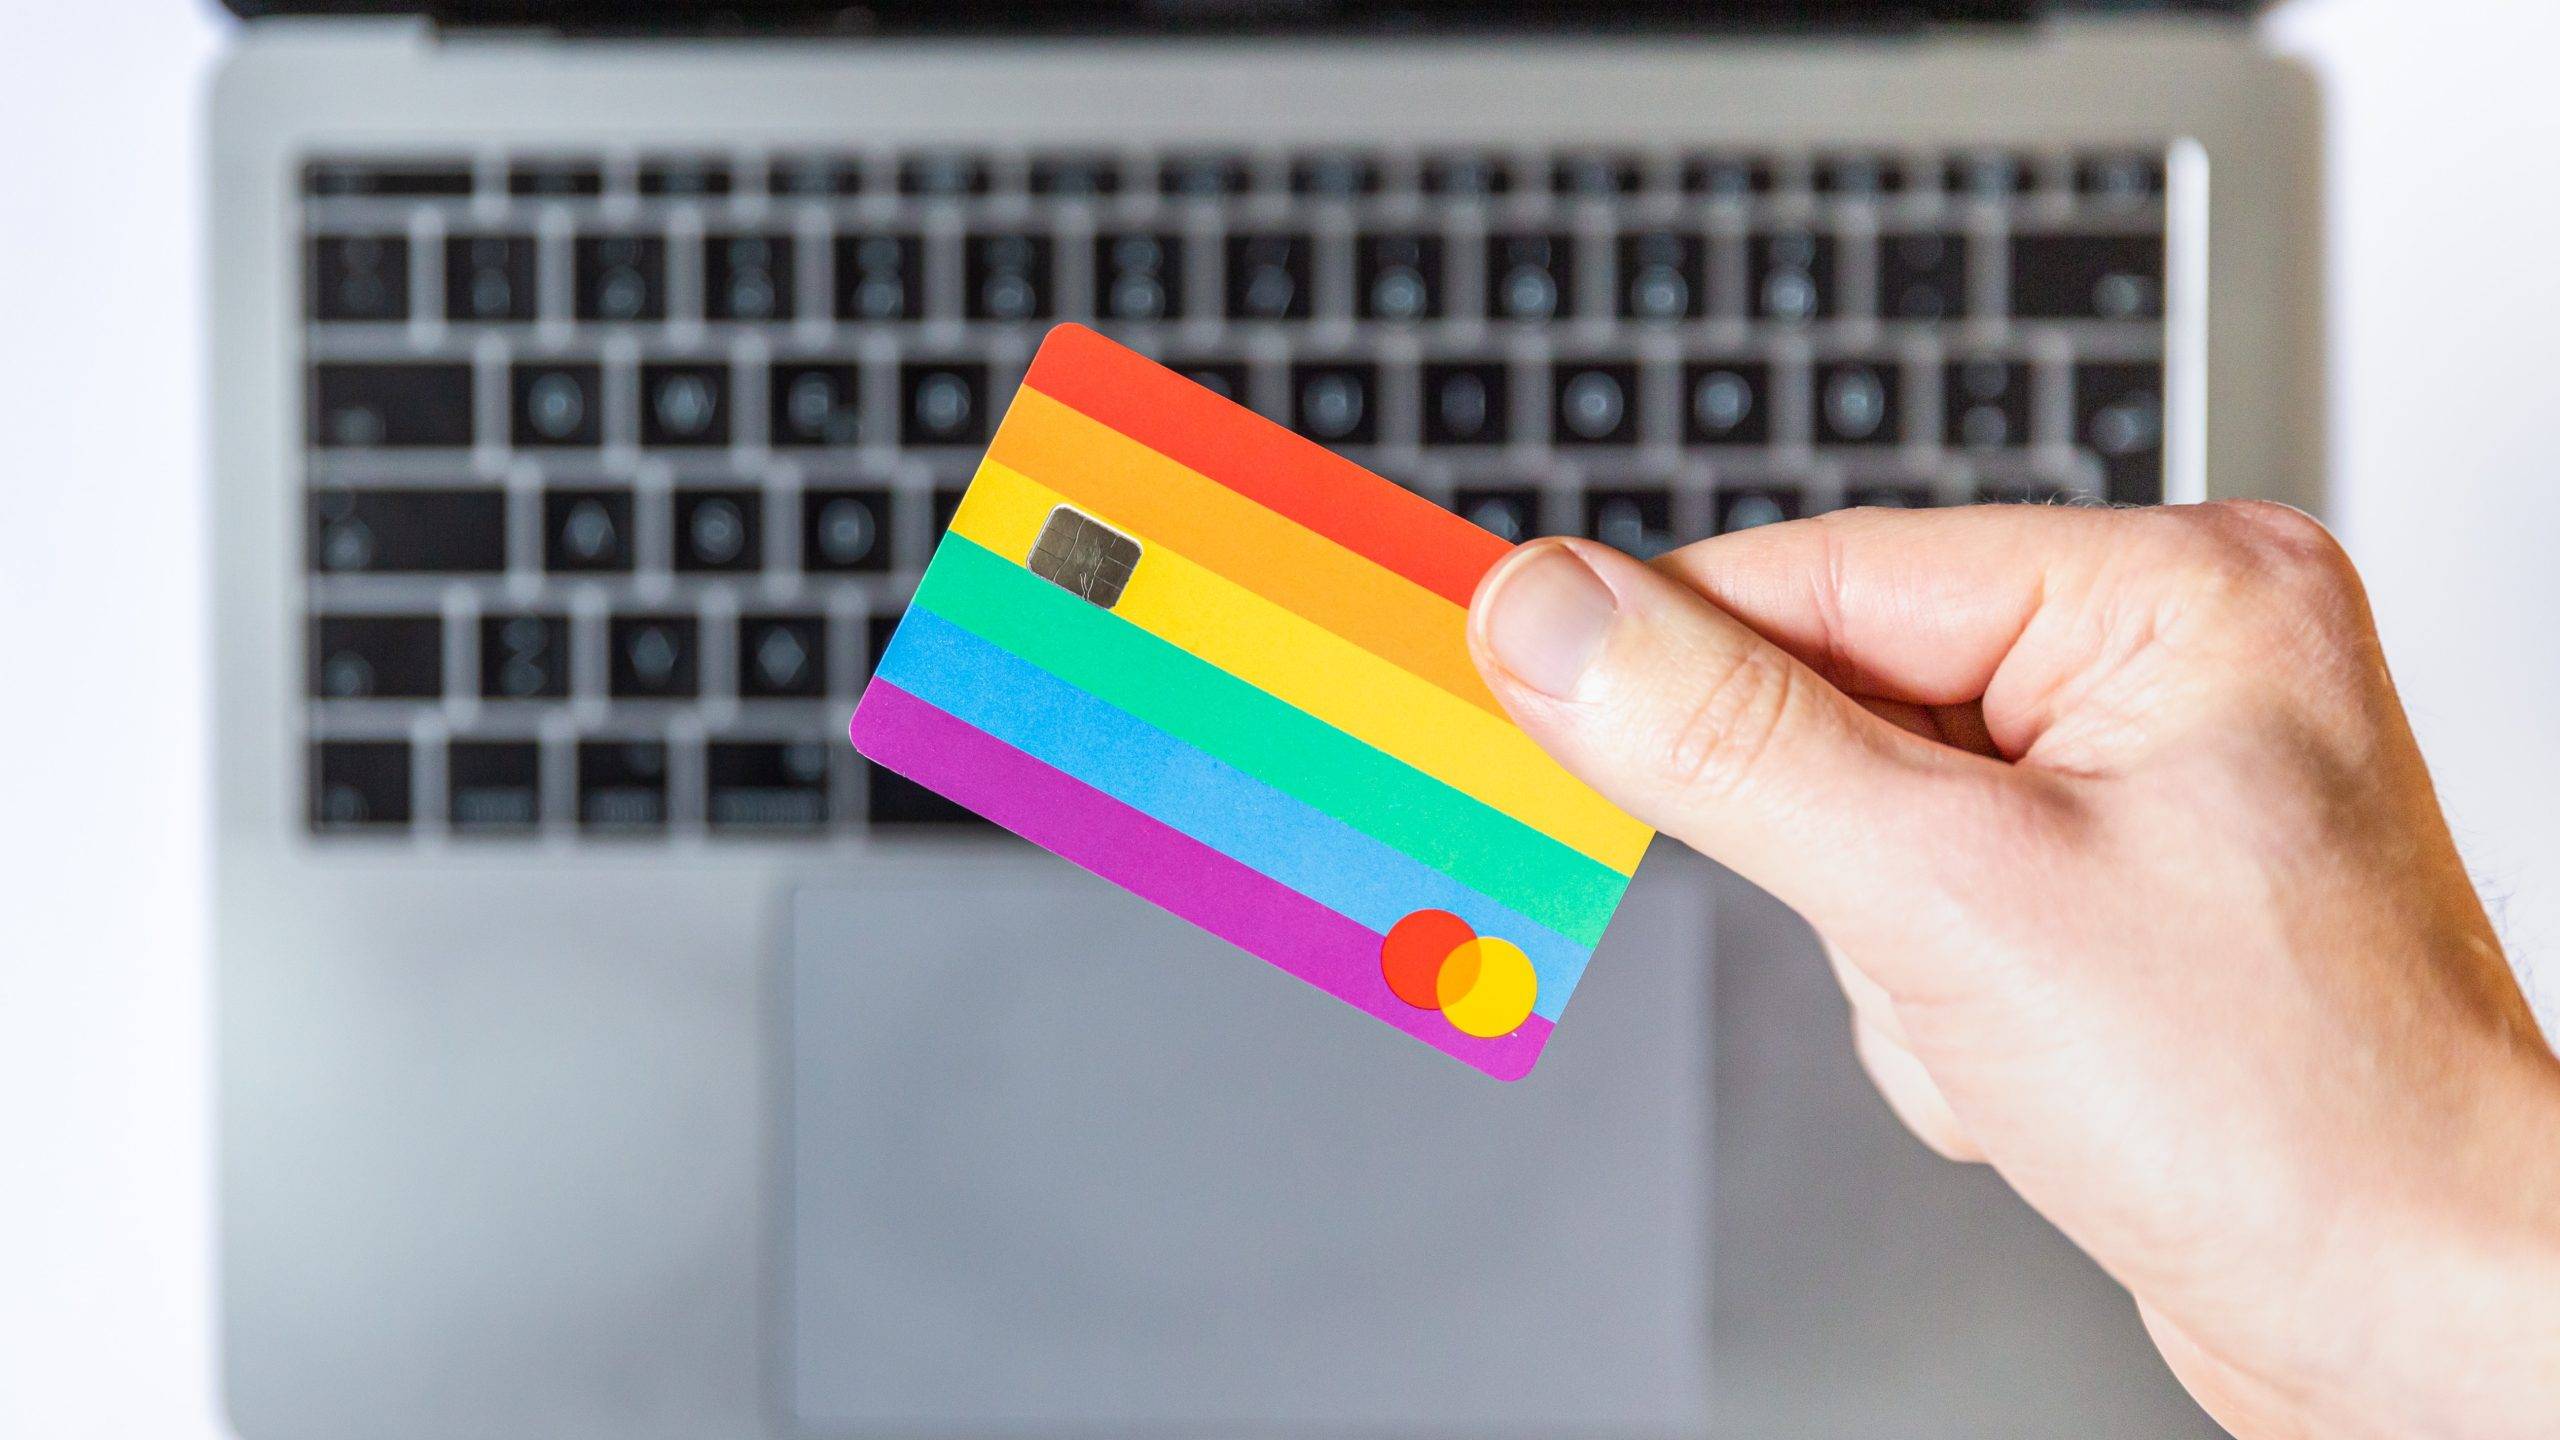 macbook-laptop-background-hand-holding-rainbow-credit-card-risks-to-online-ordering-abortion-pill